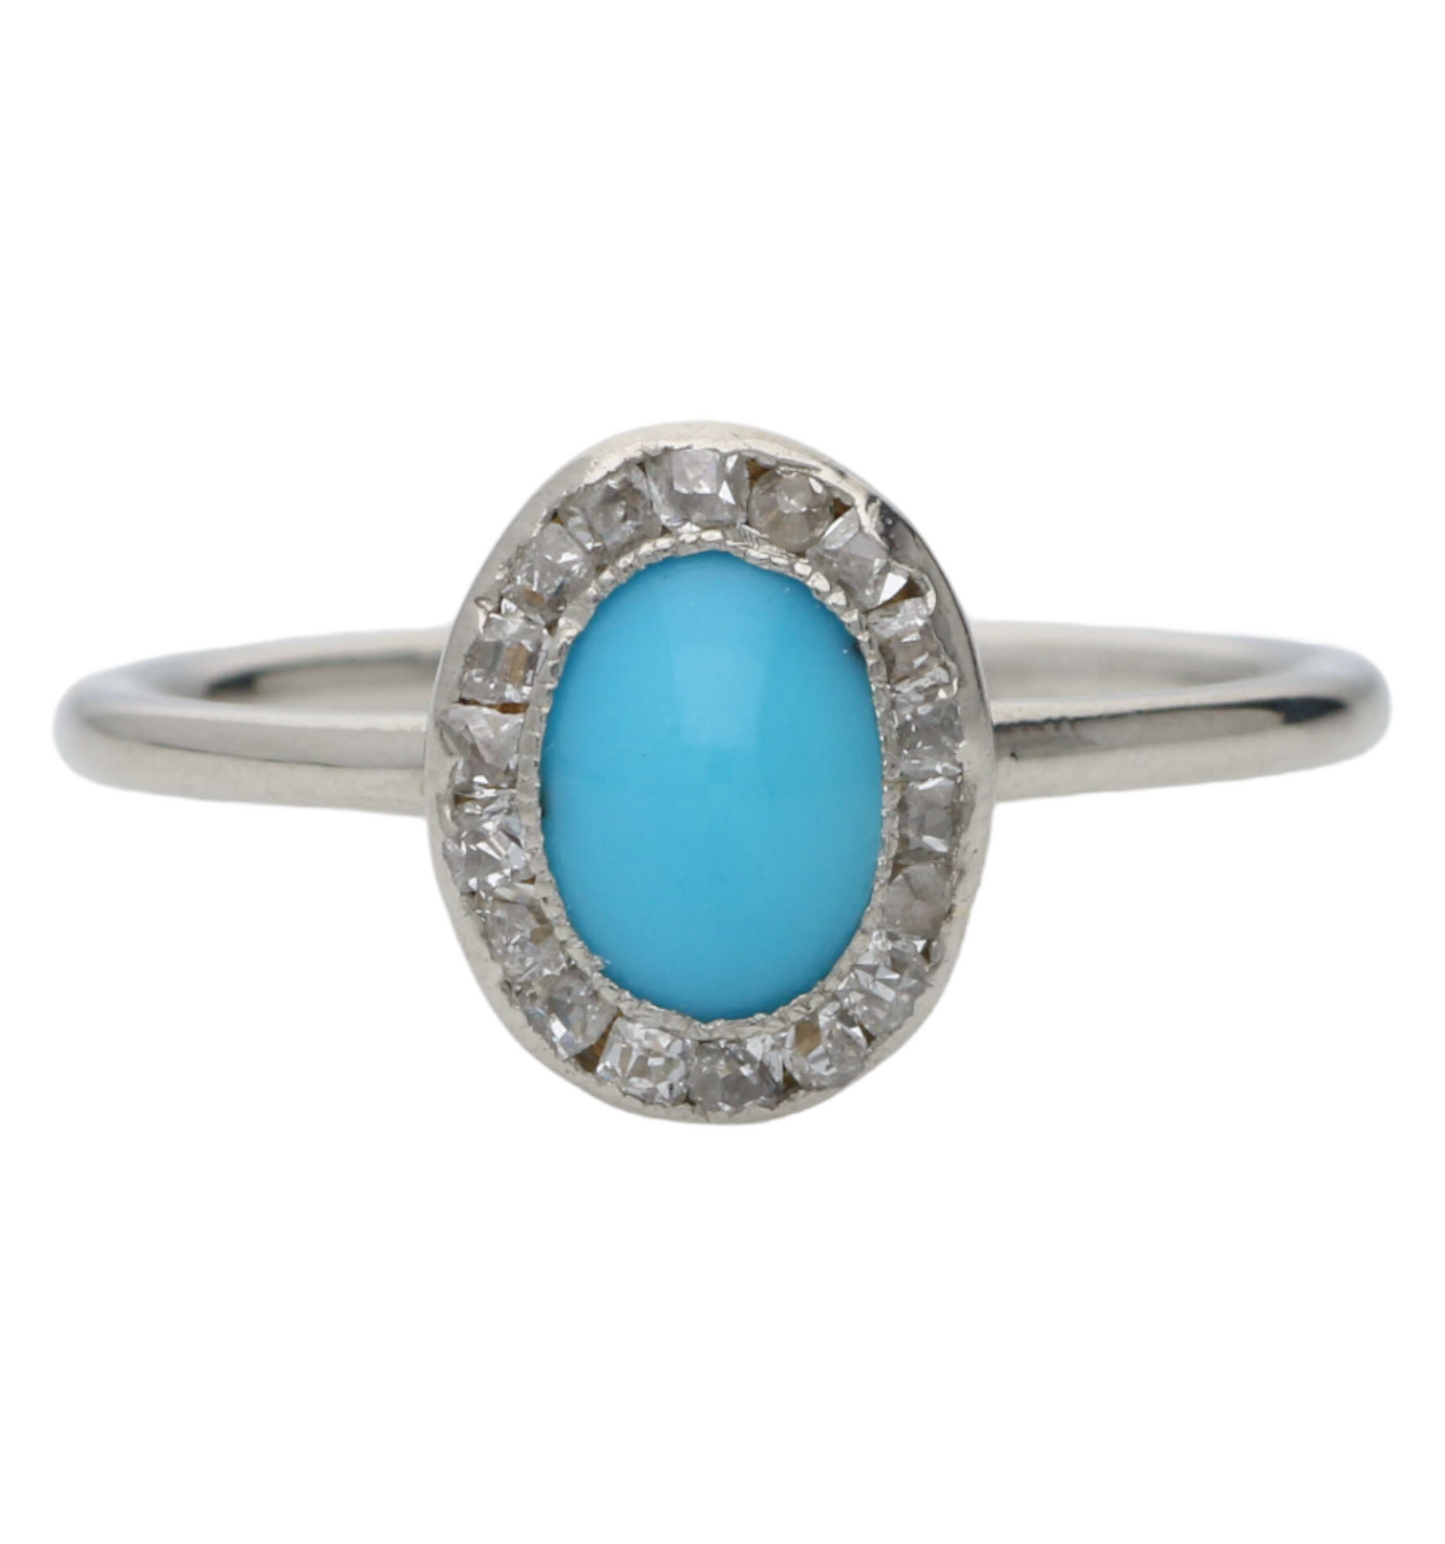 Turquoise and old cut diamond cluster ring